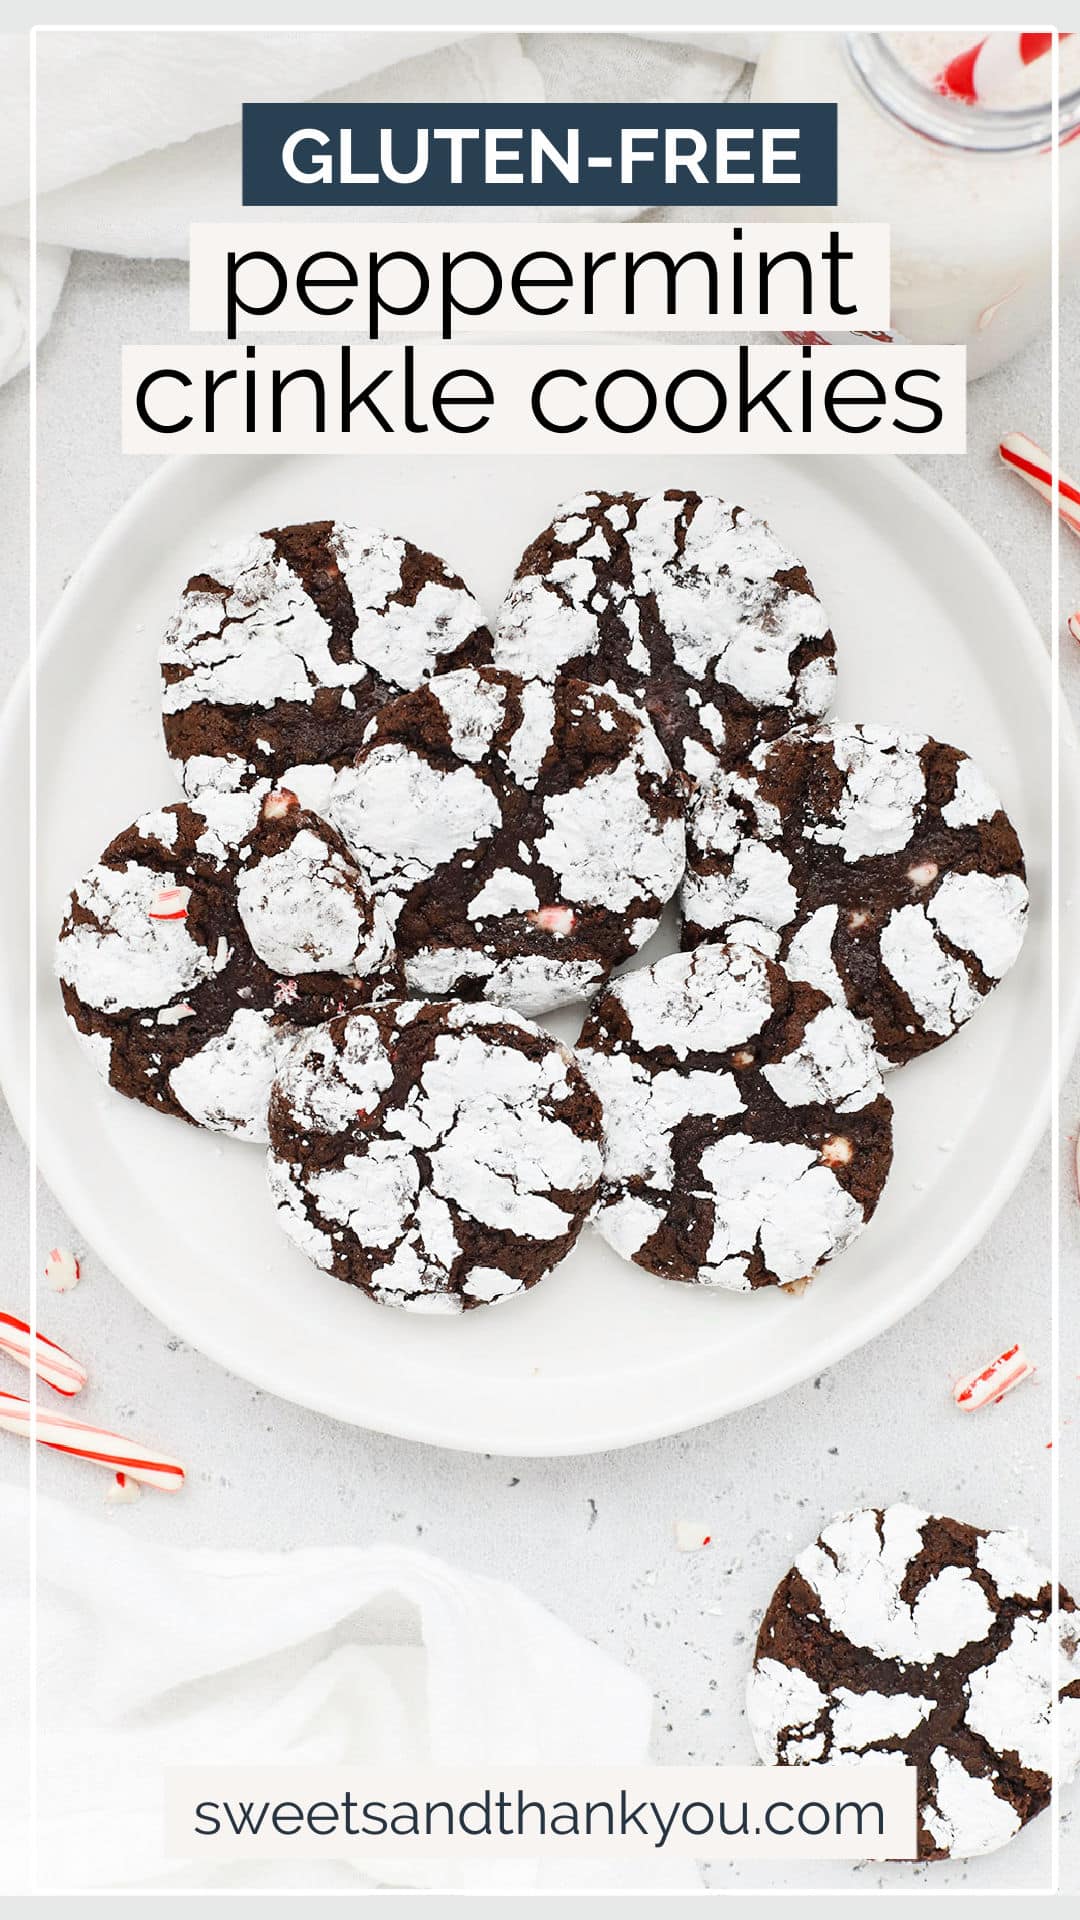 Gluten-Free Peppermint Chocolate Crinkle Cookies - Take best gluten-free chocolate crinkle cookies & give them a minty twist for the holidays! // gluten-free holiday cookies // gluten free peppermint crinkles // gluten free crinkles // gluten-free chocolate cookies // gluten free christmas cookies // gluten free chocolate peppermint crinkles